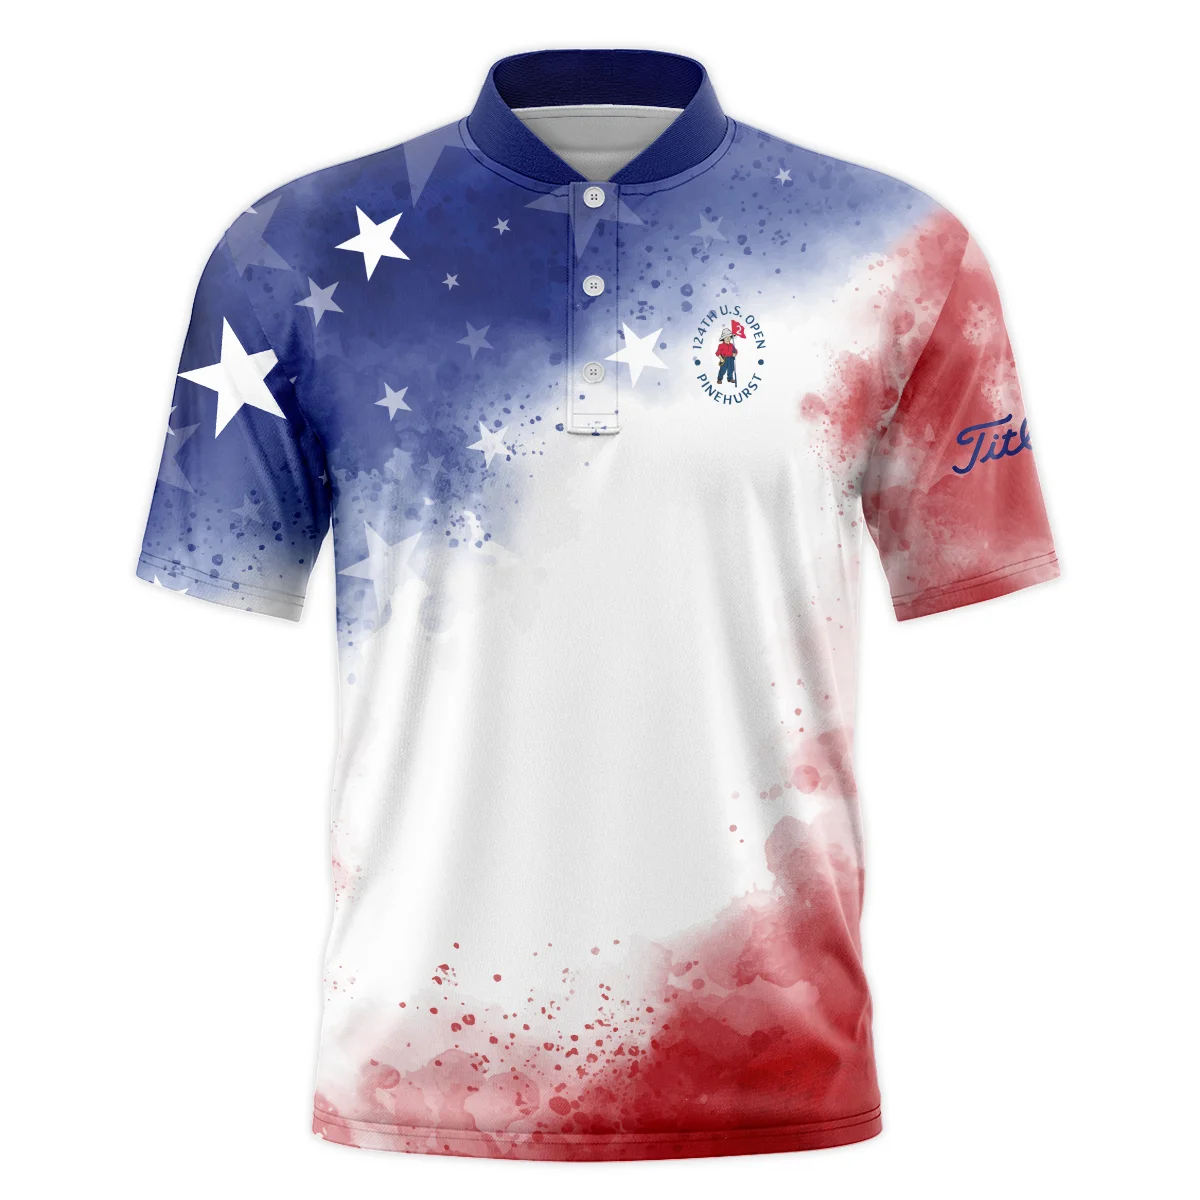 124th U.S. Open Pinehurst Titleist Blue Red Watercolor Star White Backgound Polo Shirt Style Classic Polo Shirt For Men